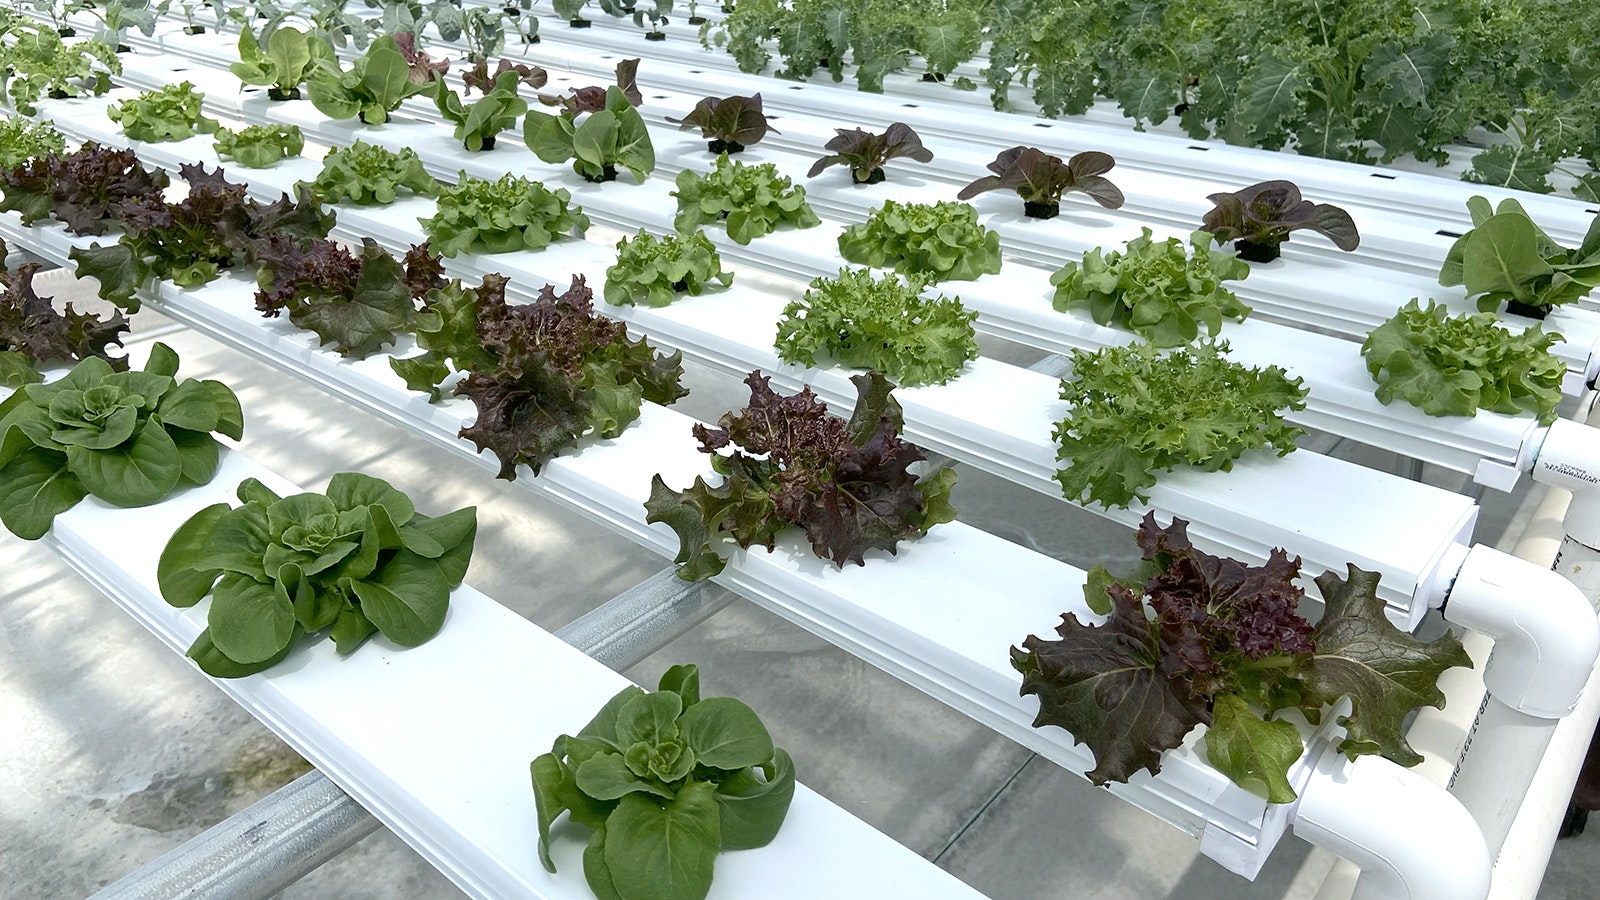 Hydroponic greens in production at Satchitanada Ranch in Sublette County.